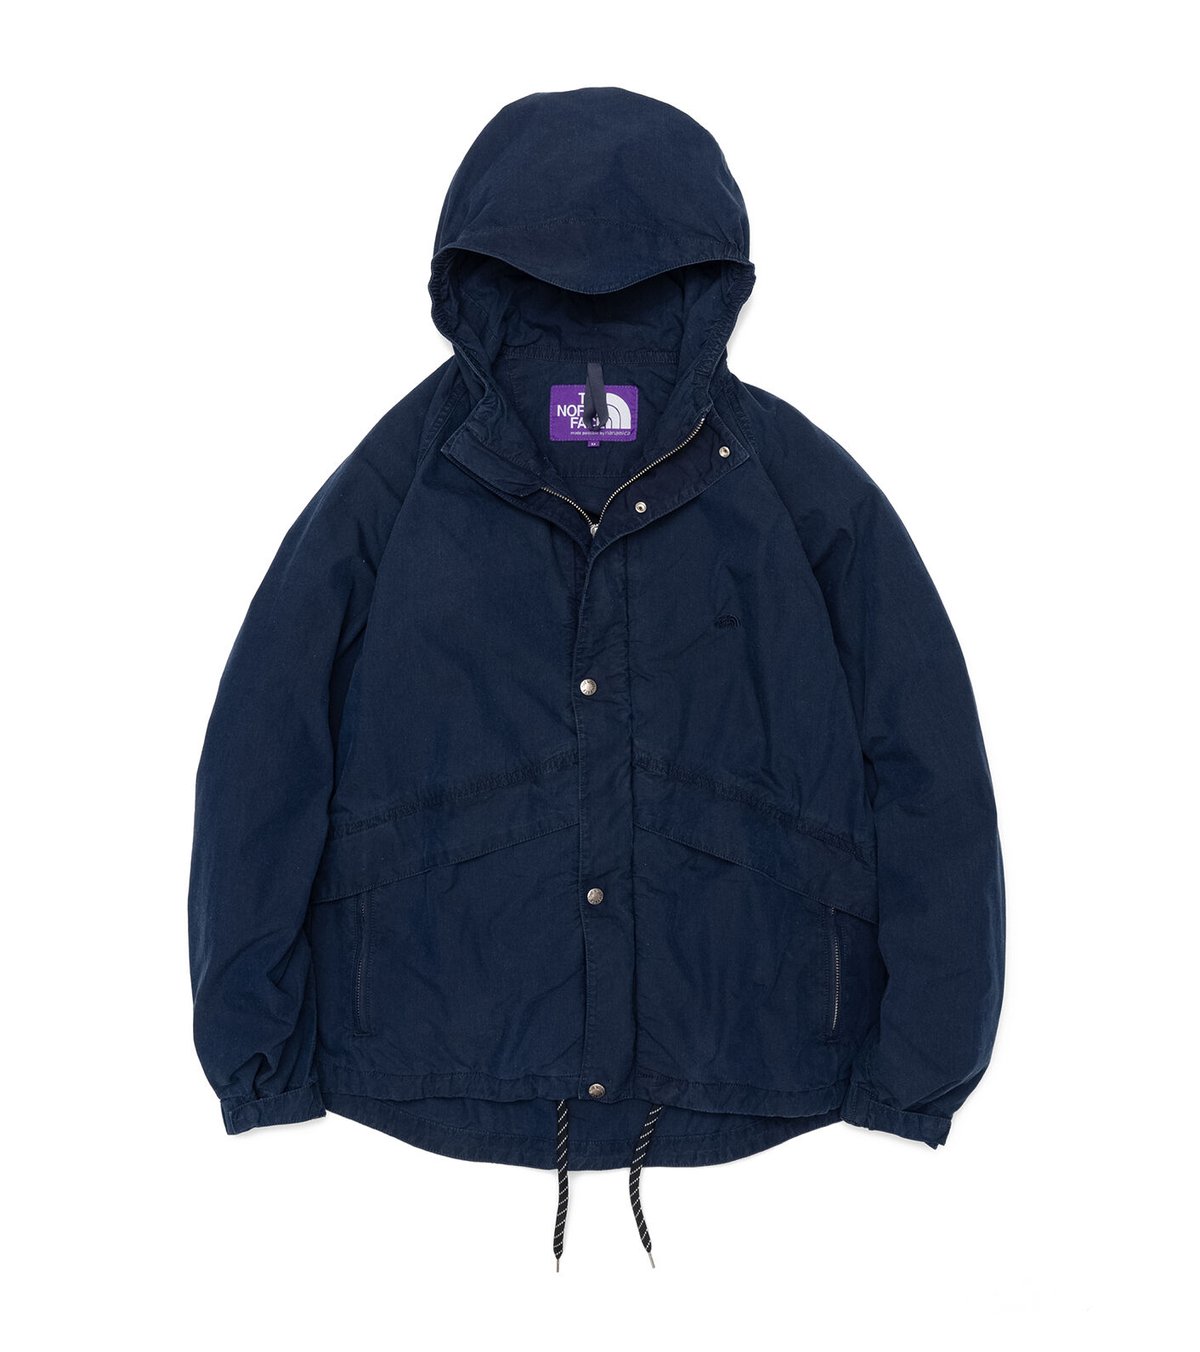 Indigo Mountain Wind Parka THE NORTH FACE PURPLE LABEL NP2105N